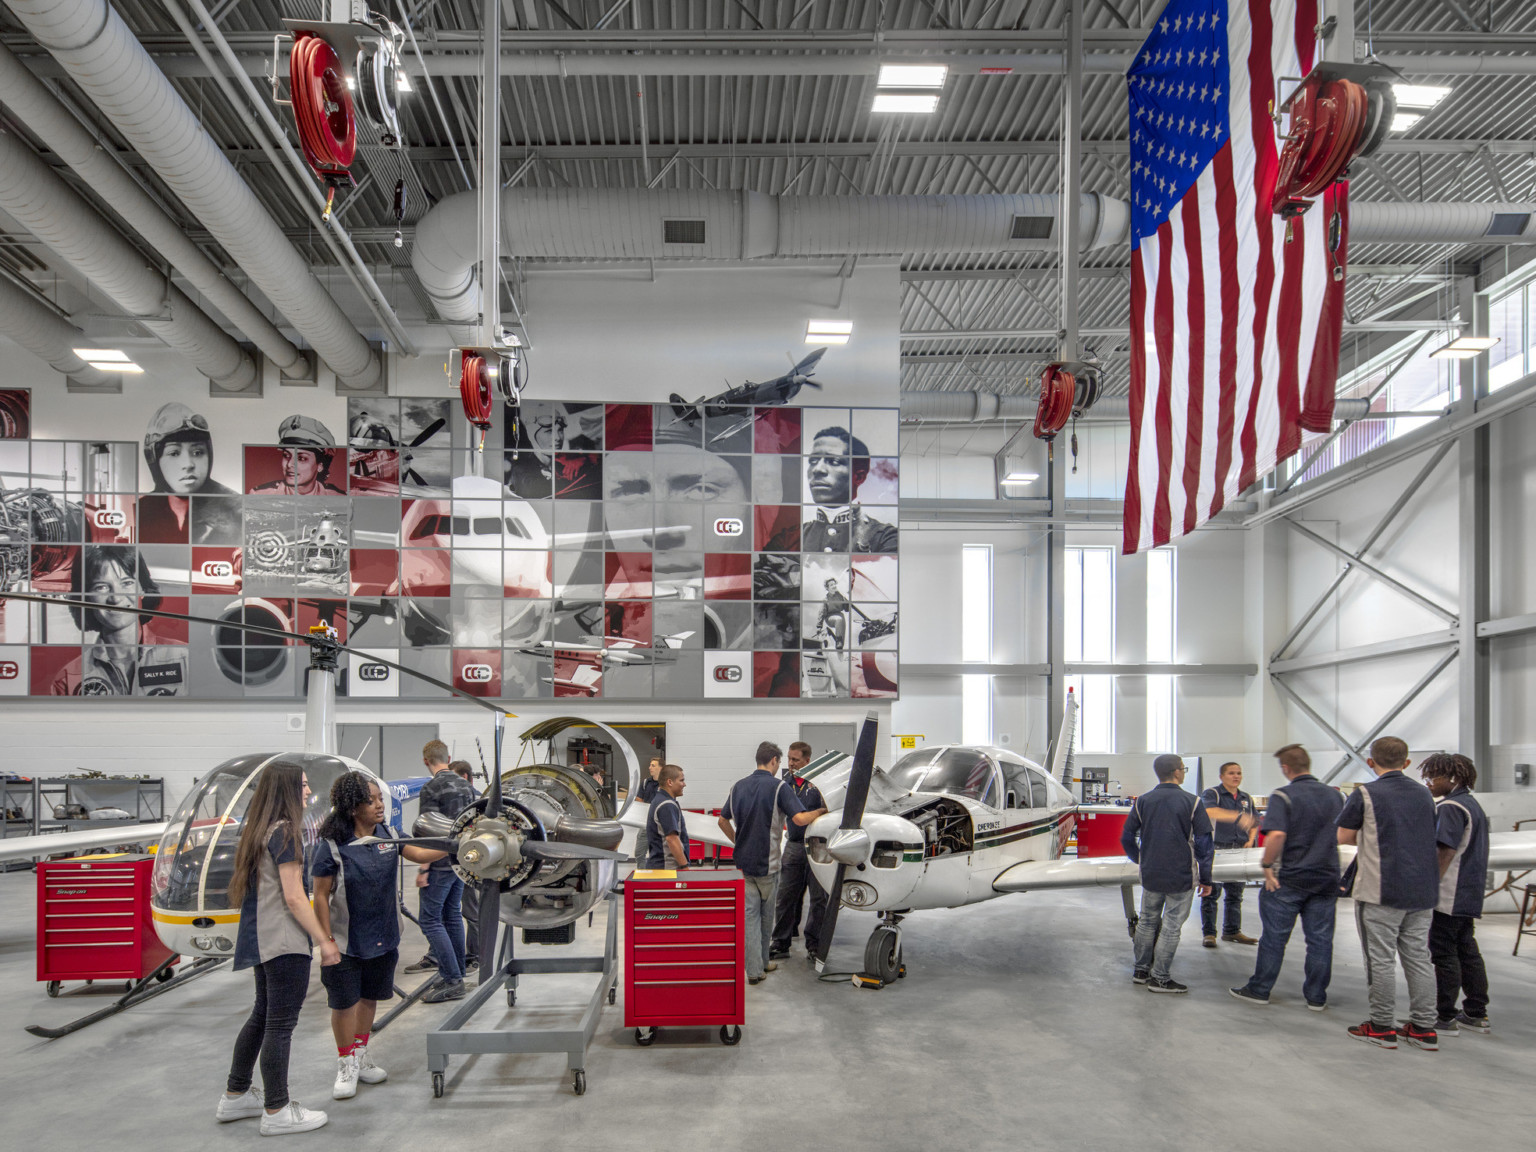 Aviation lab with helicopter, small plane, and displayed engine. Mural at back with planes and pilots. American flag, right